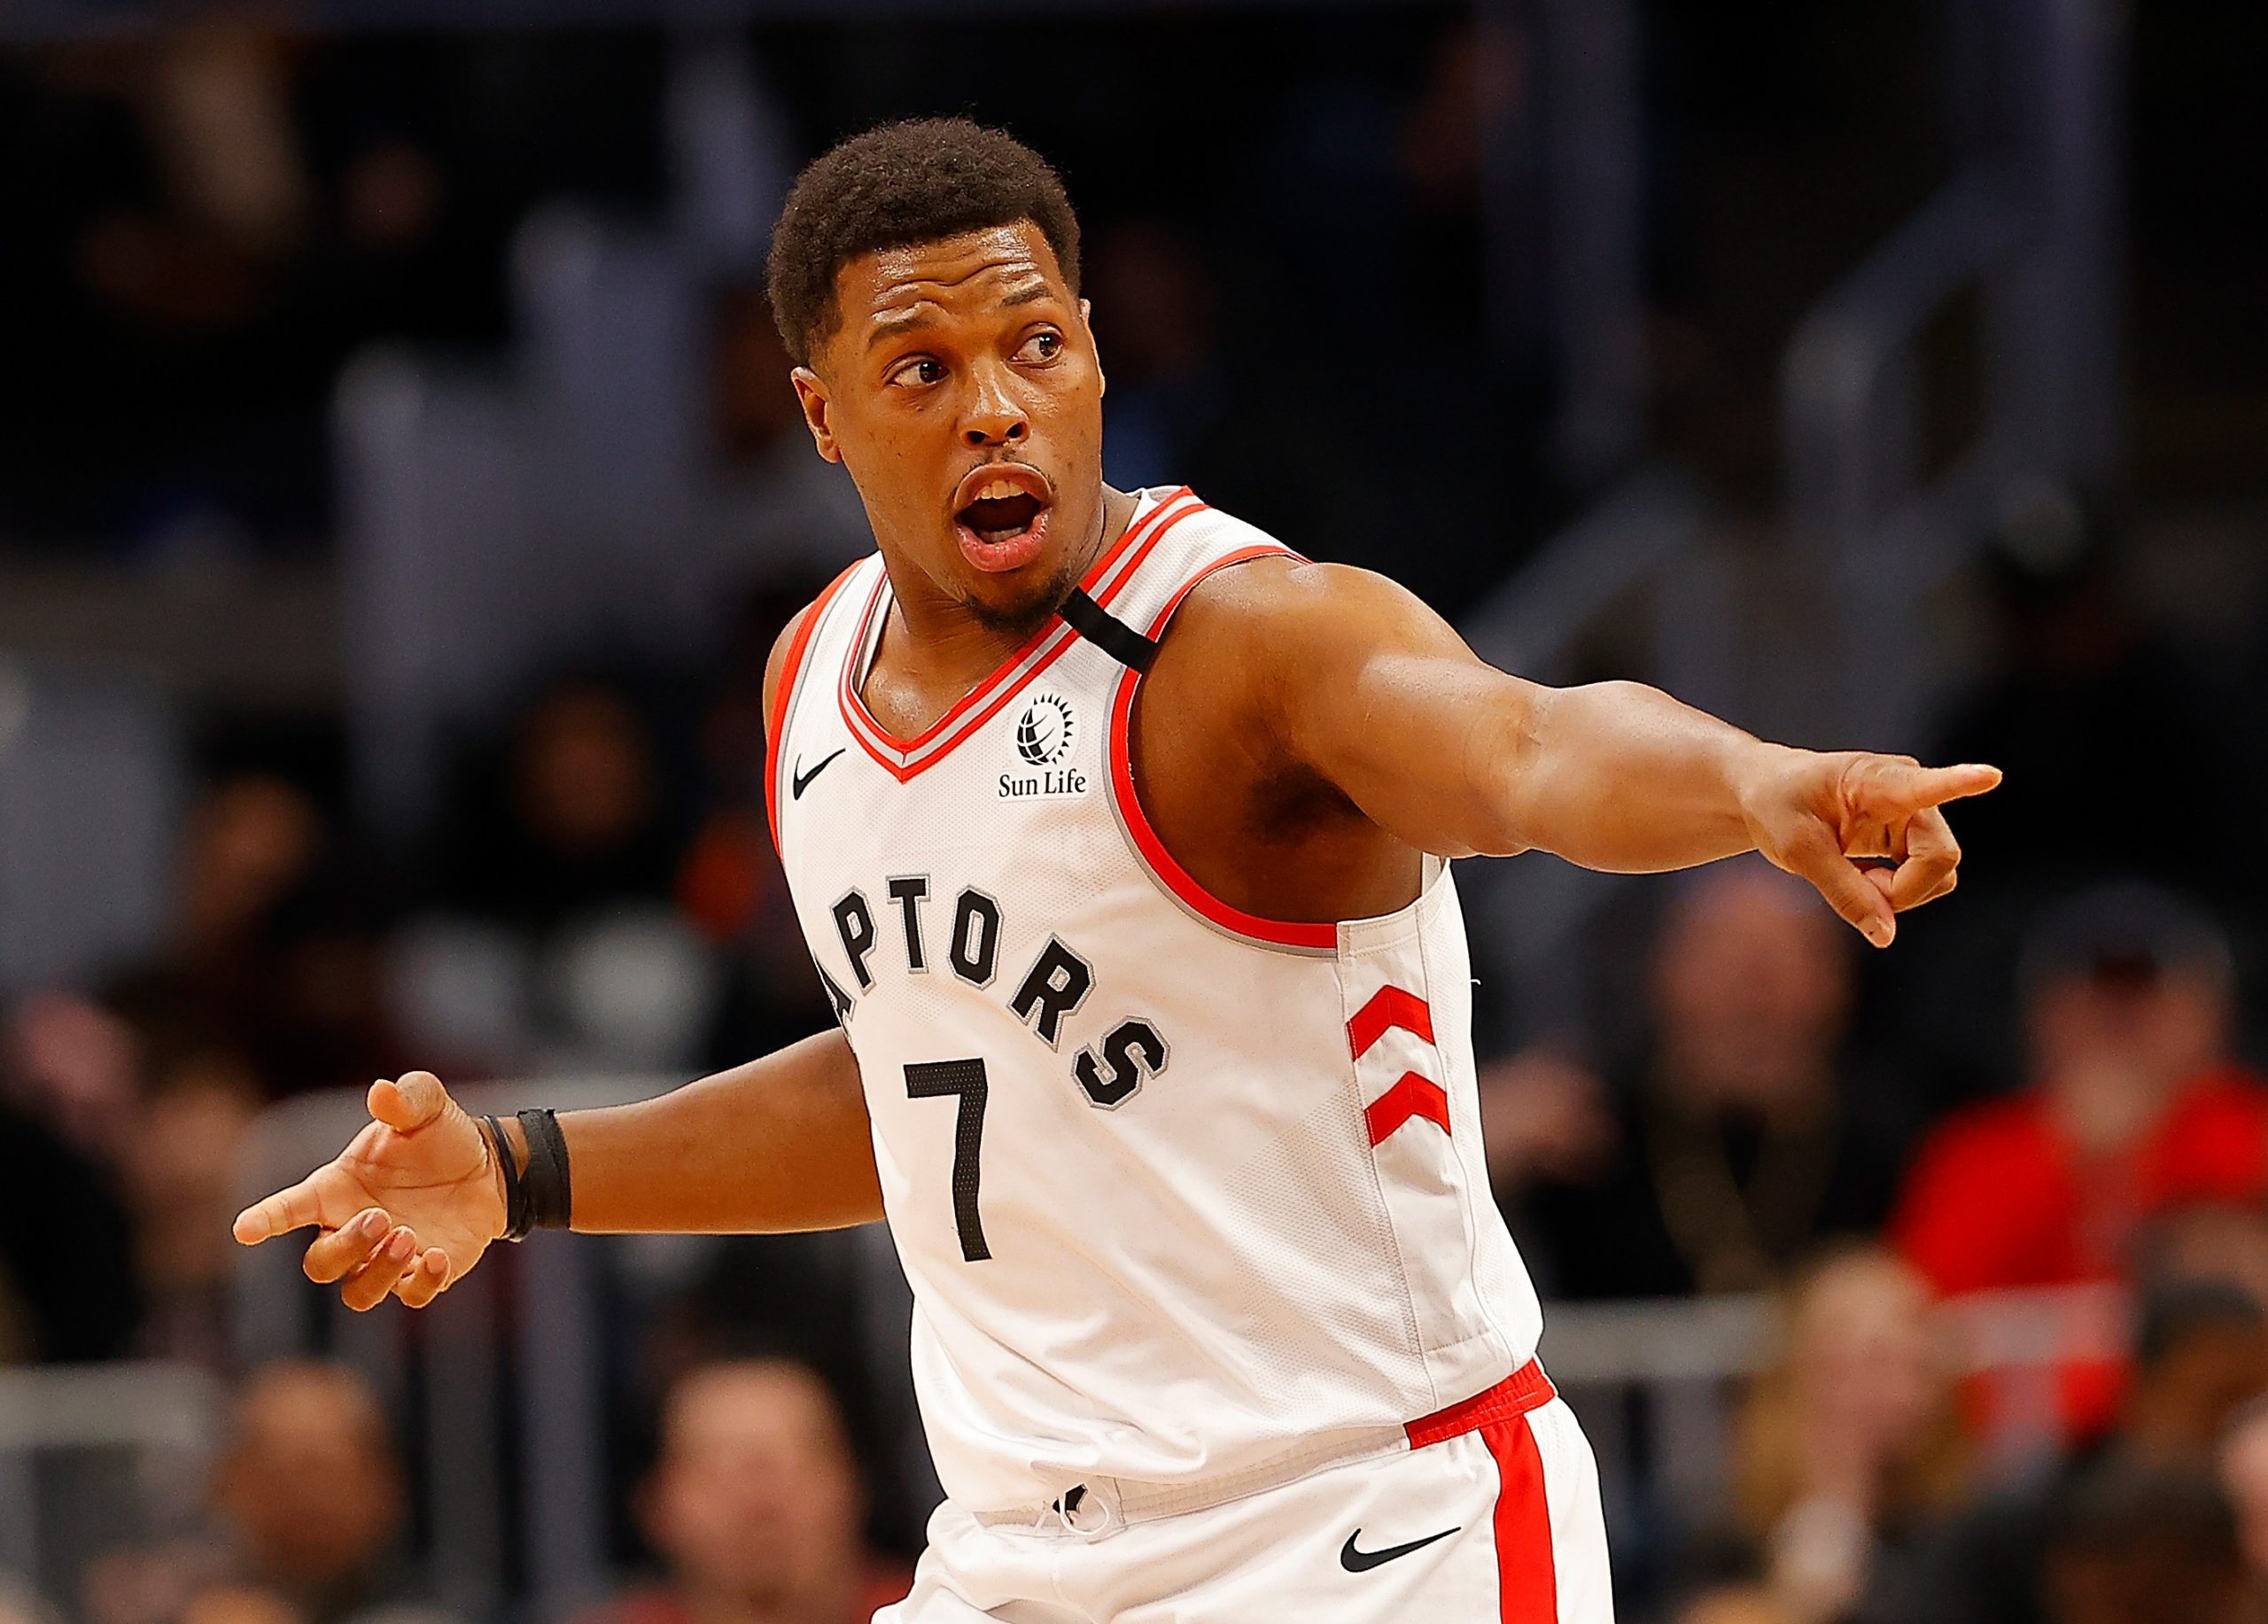 Kyle Lowry 2021: Net Worth, Salary, and Endorsements